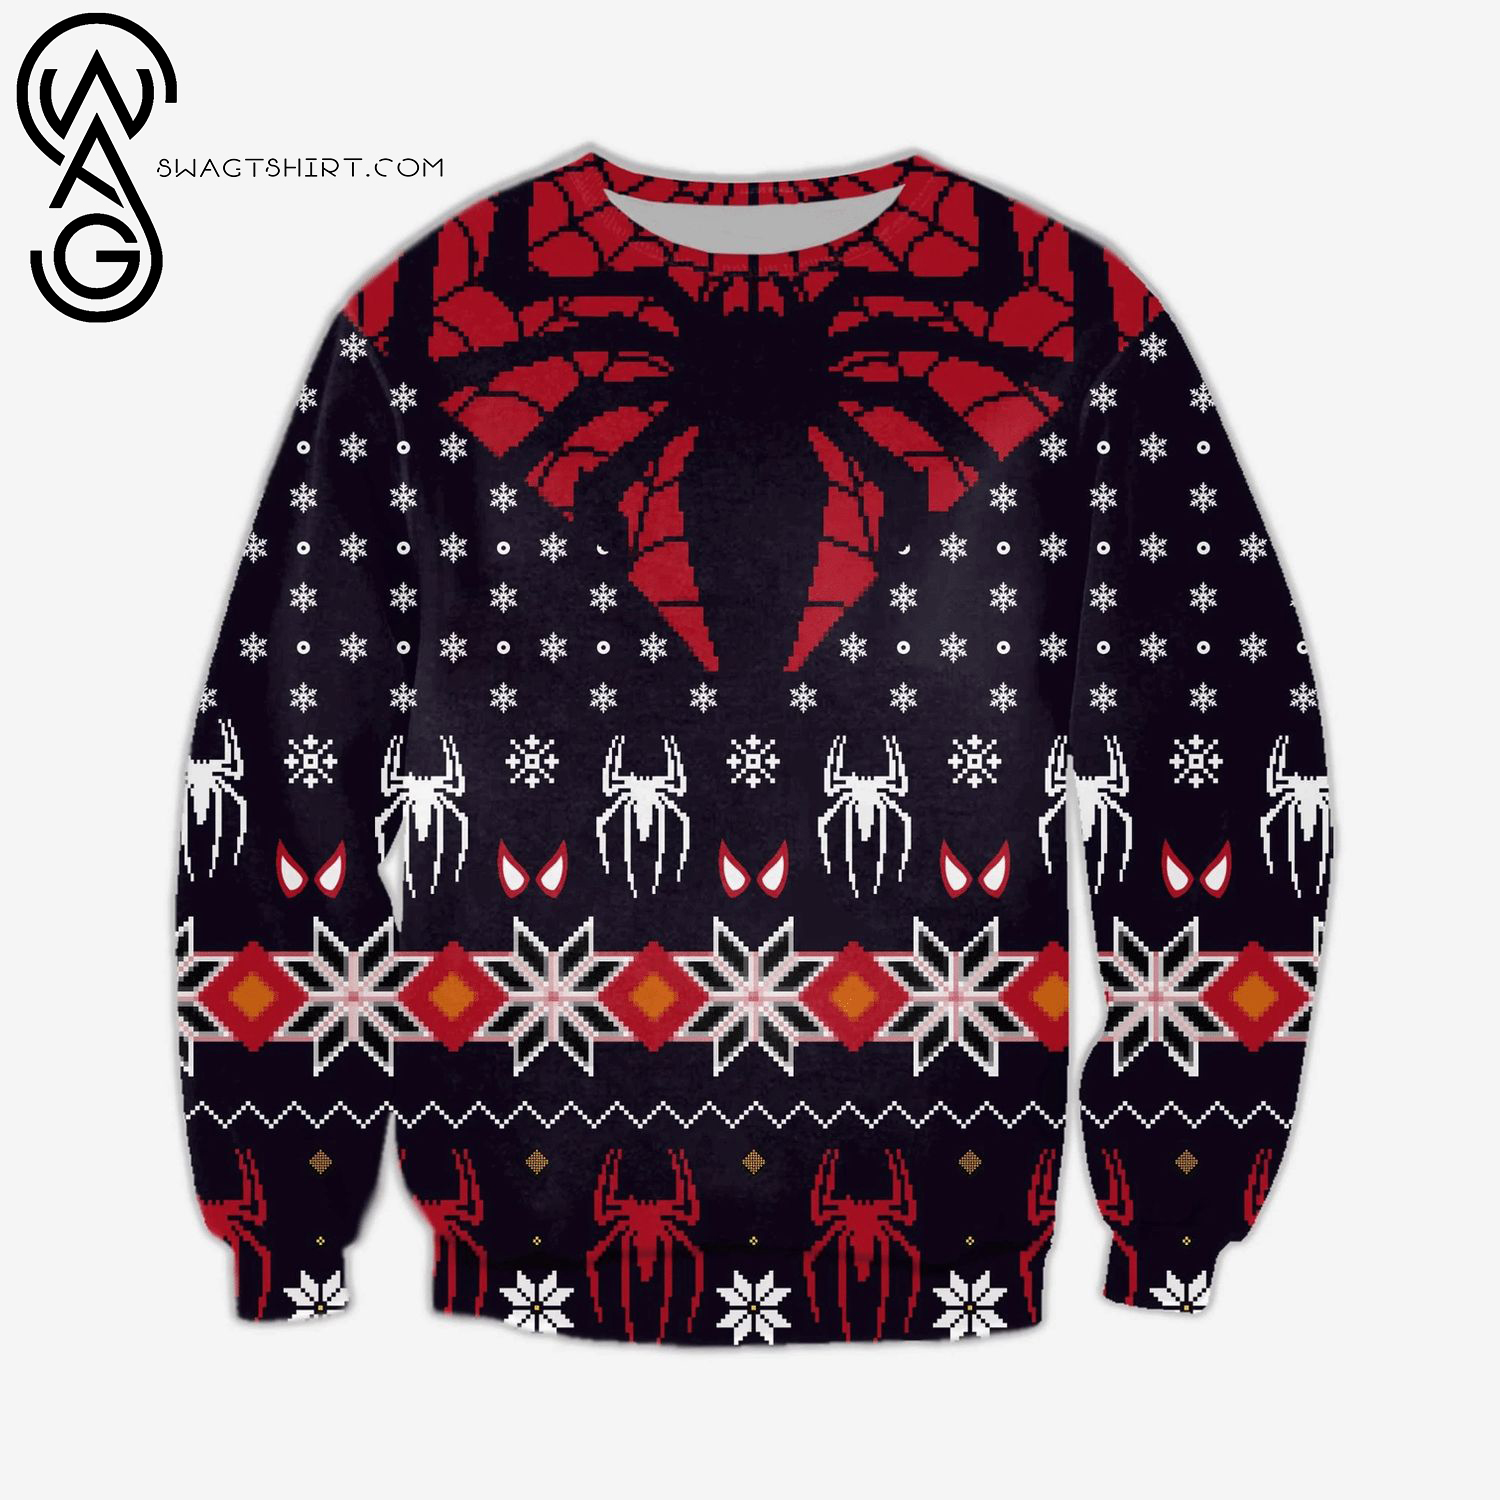 Spider-Man Full Print Ugly Christmas Sweater